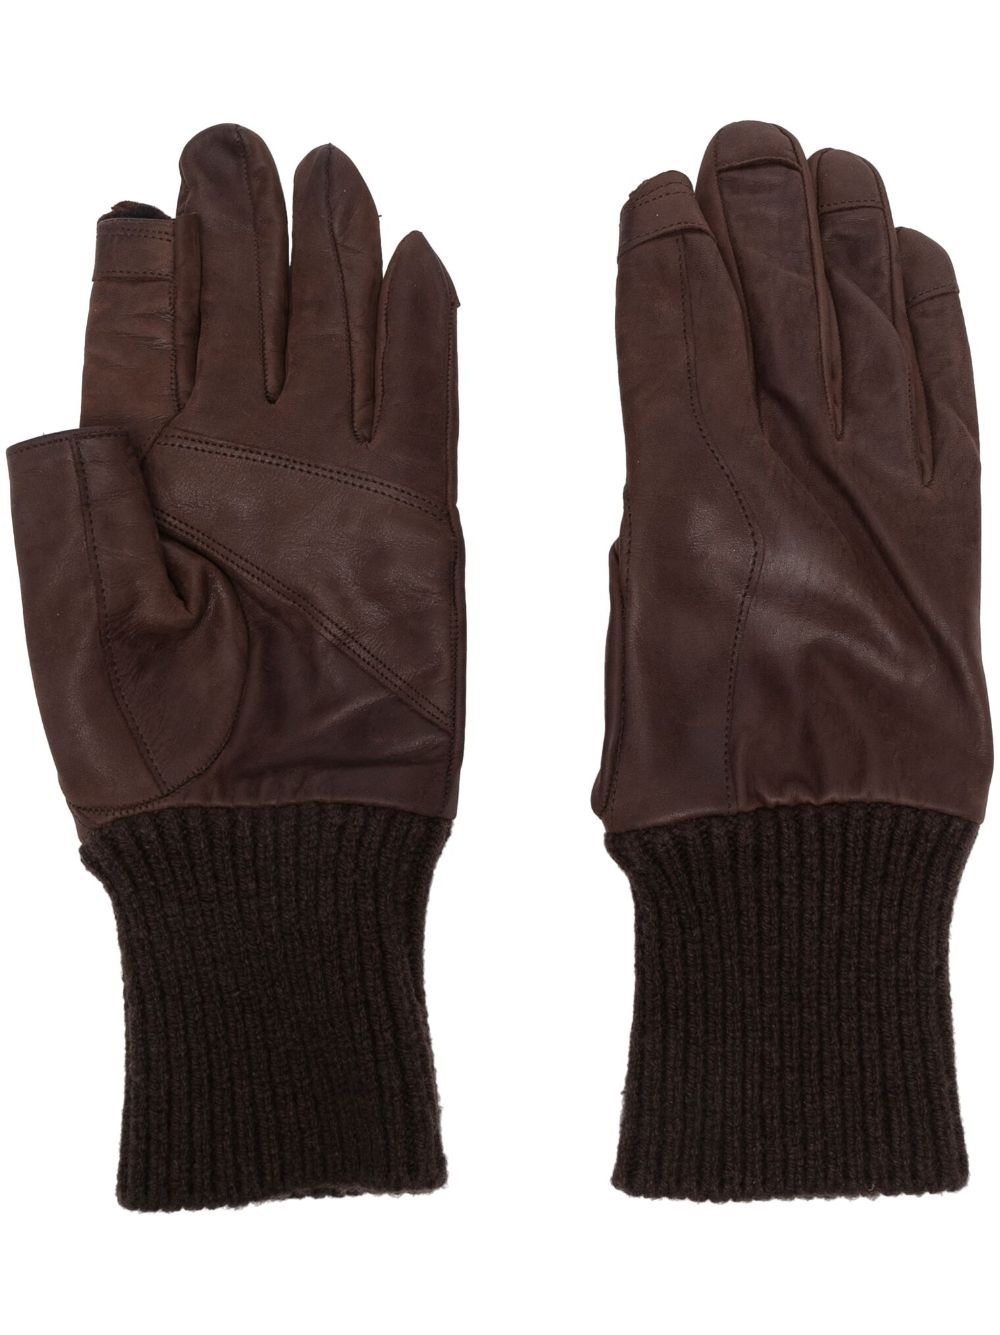 ribbed leather gloves - 1